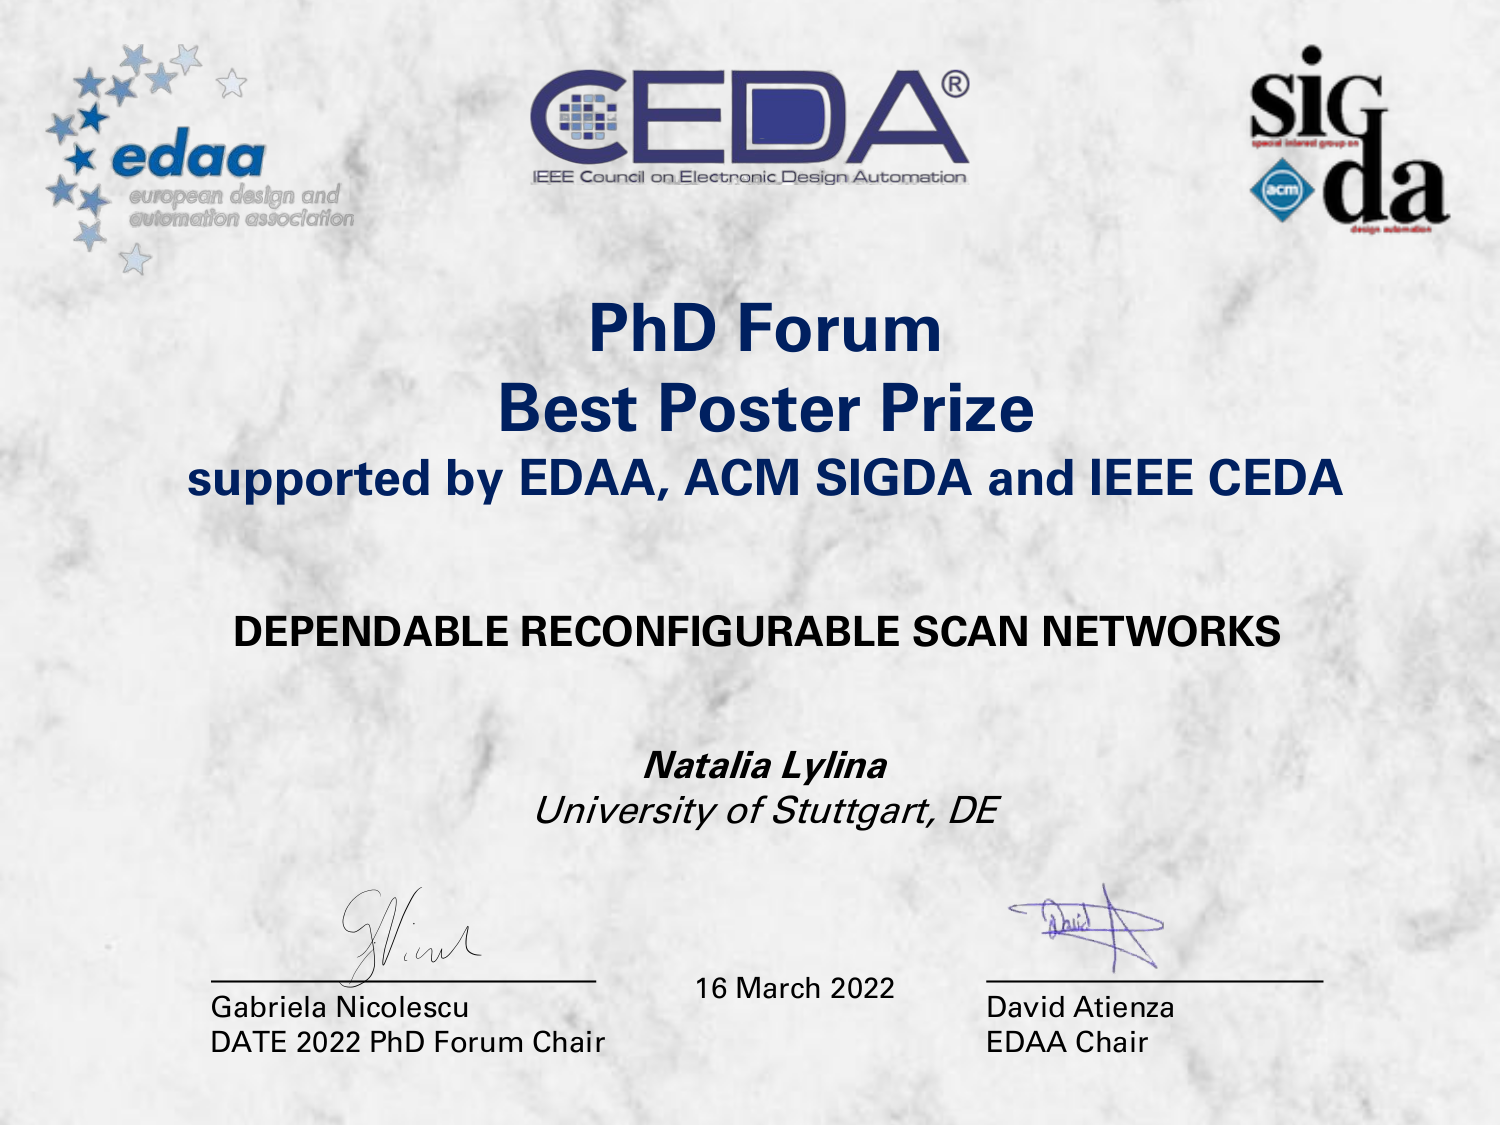 DATE 2022 PhD Forum Best Poster Prize